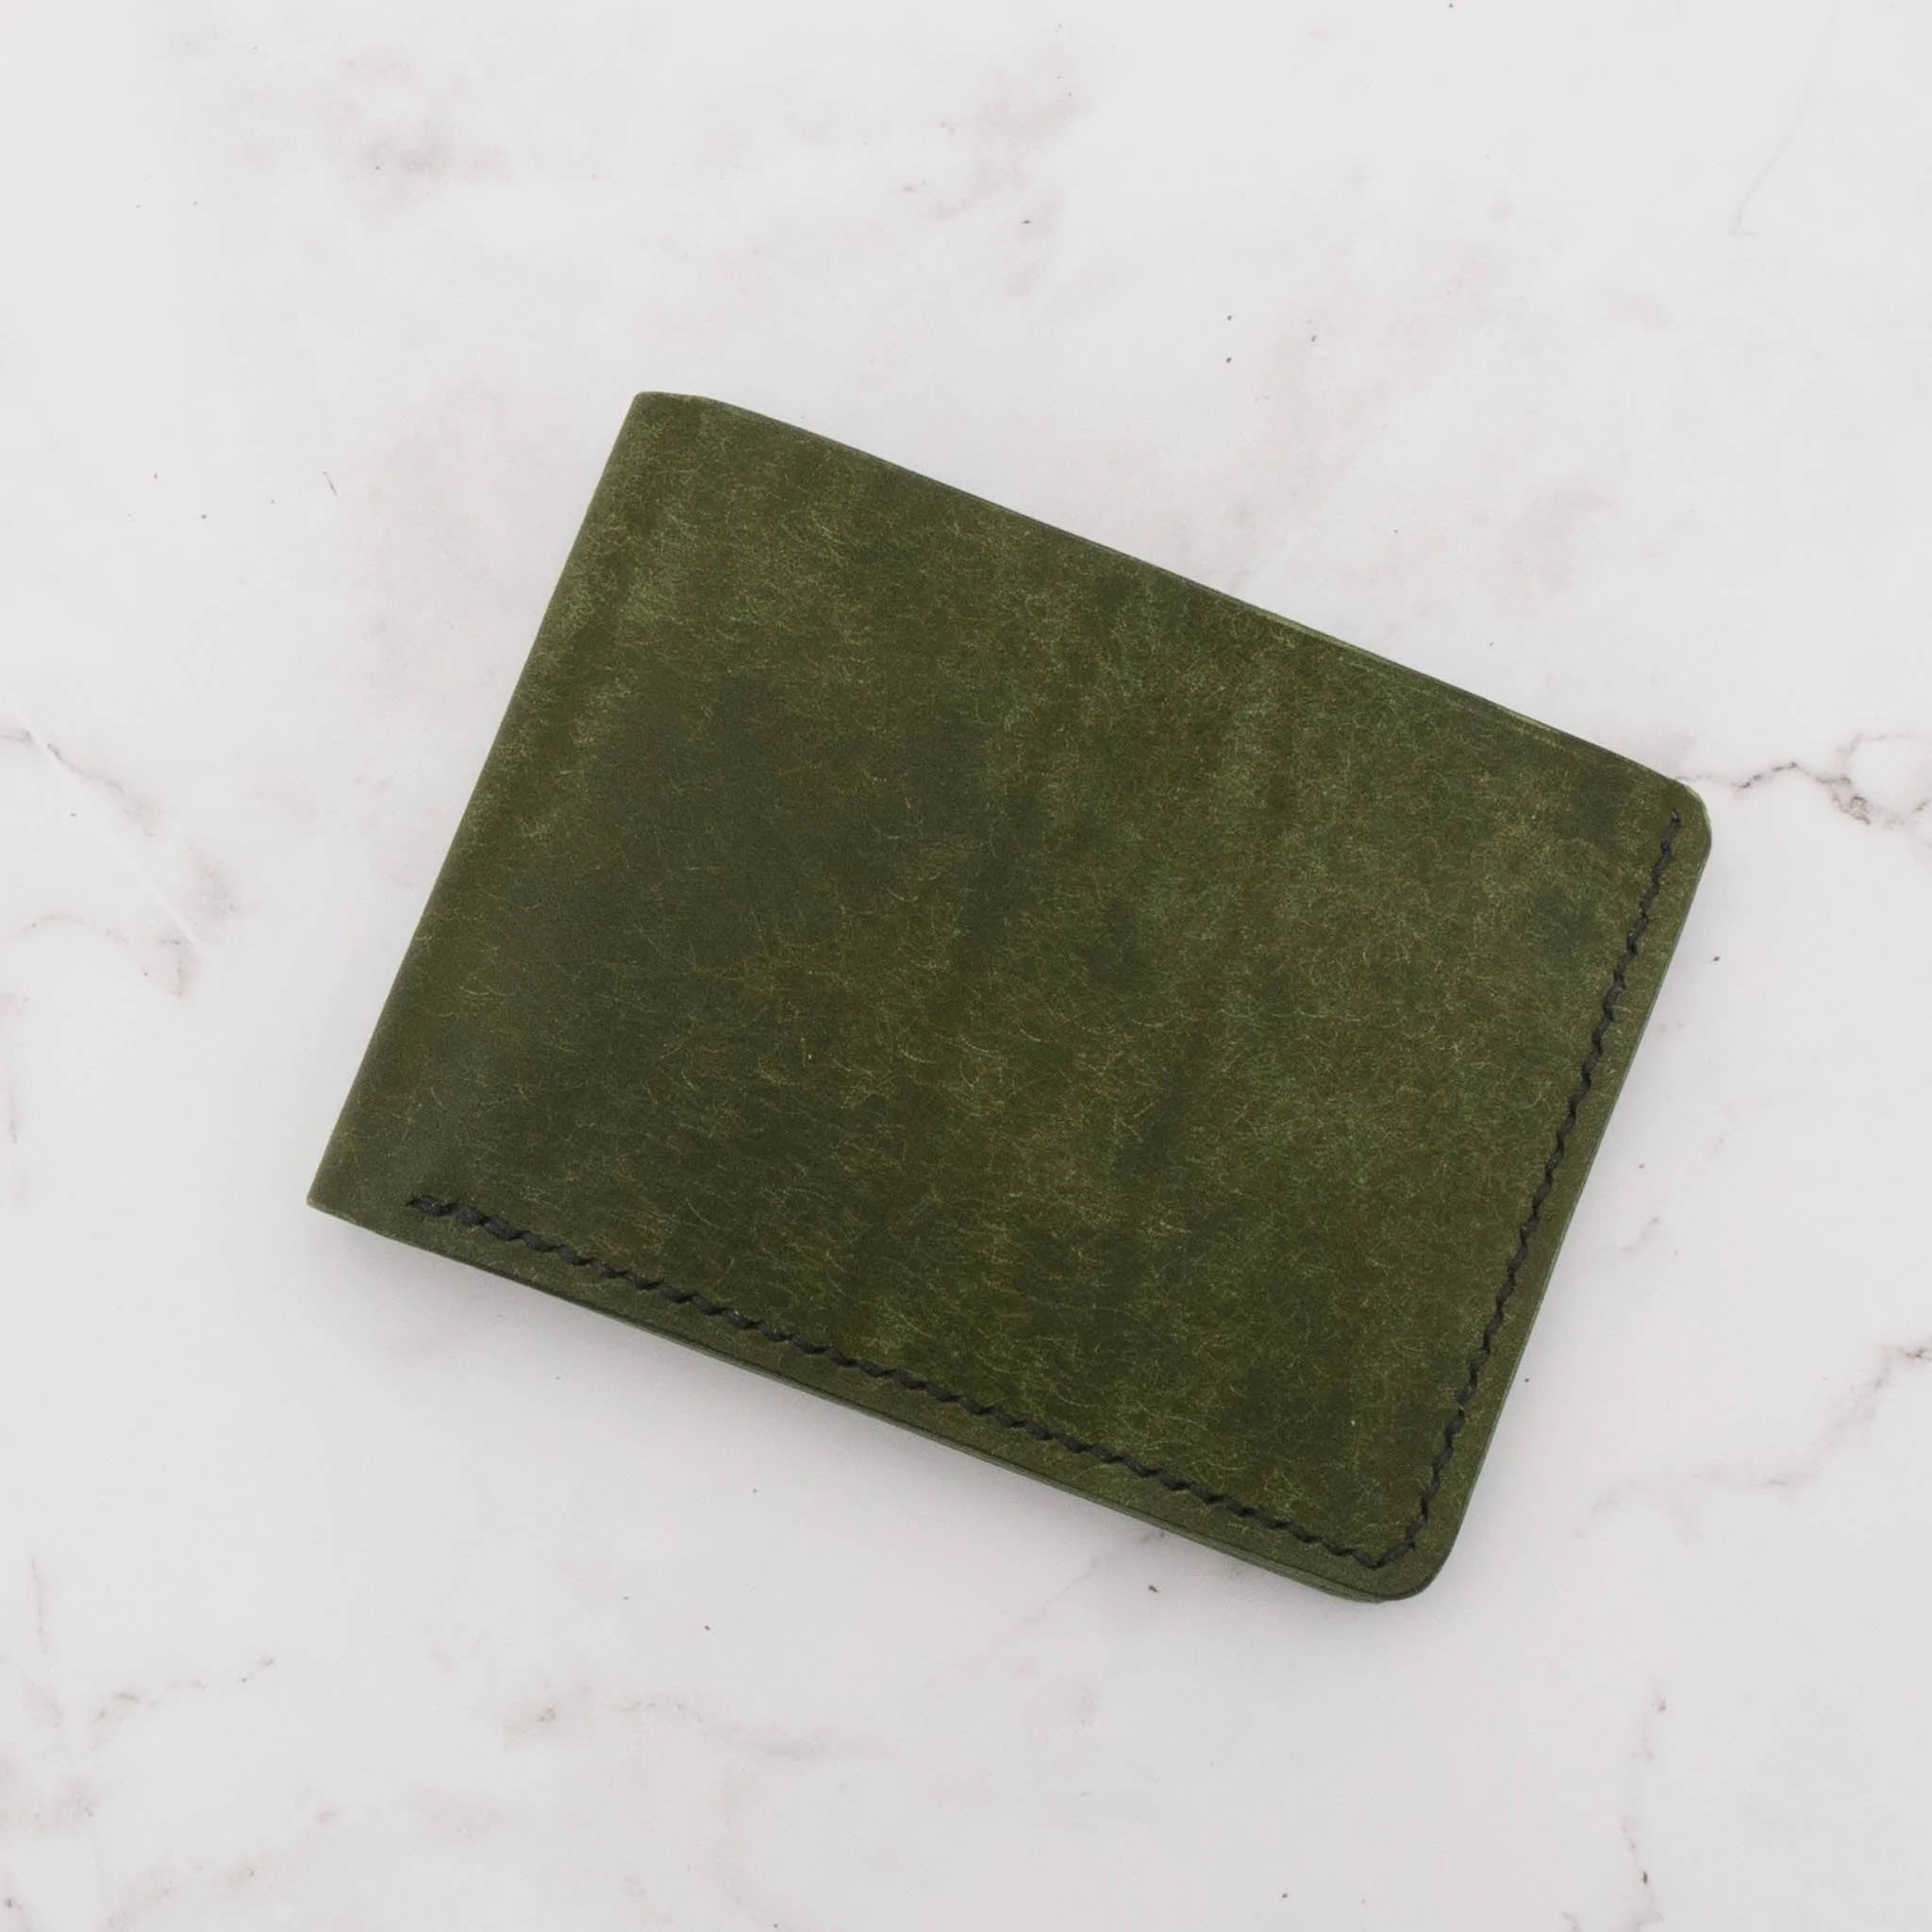 Cheekoo's Handcrafted Slim Classic Leather Bifold Wallet - Olive Green